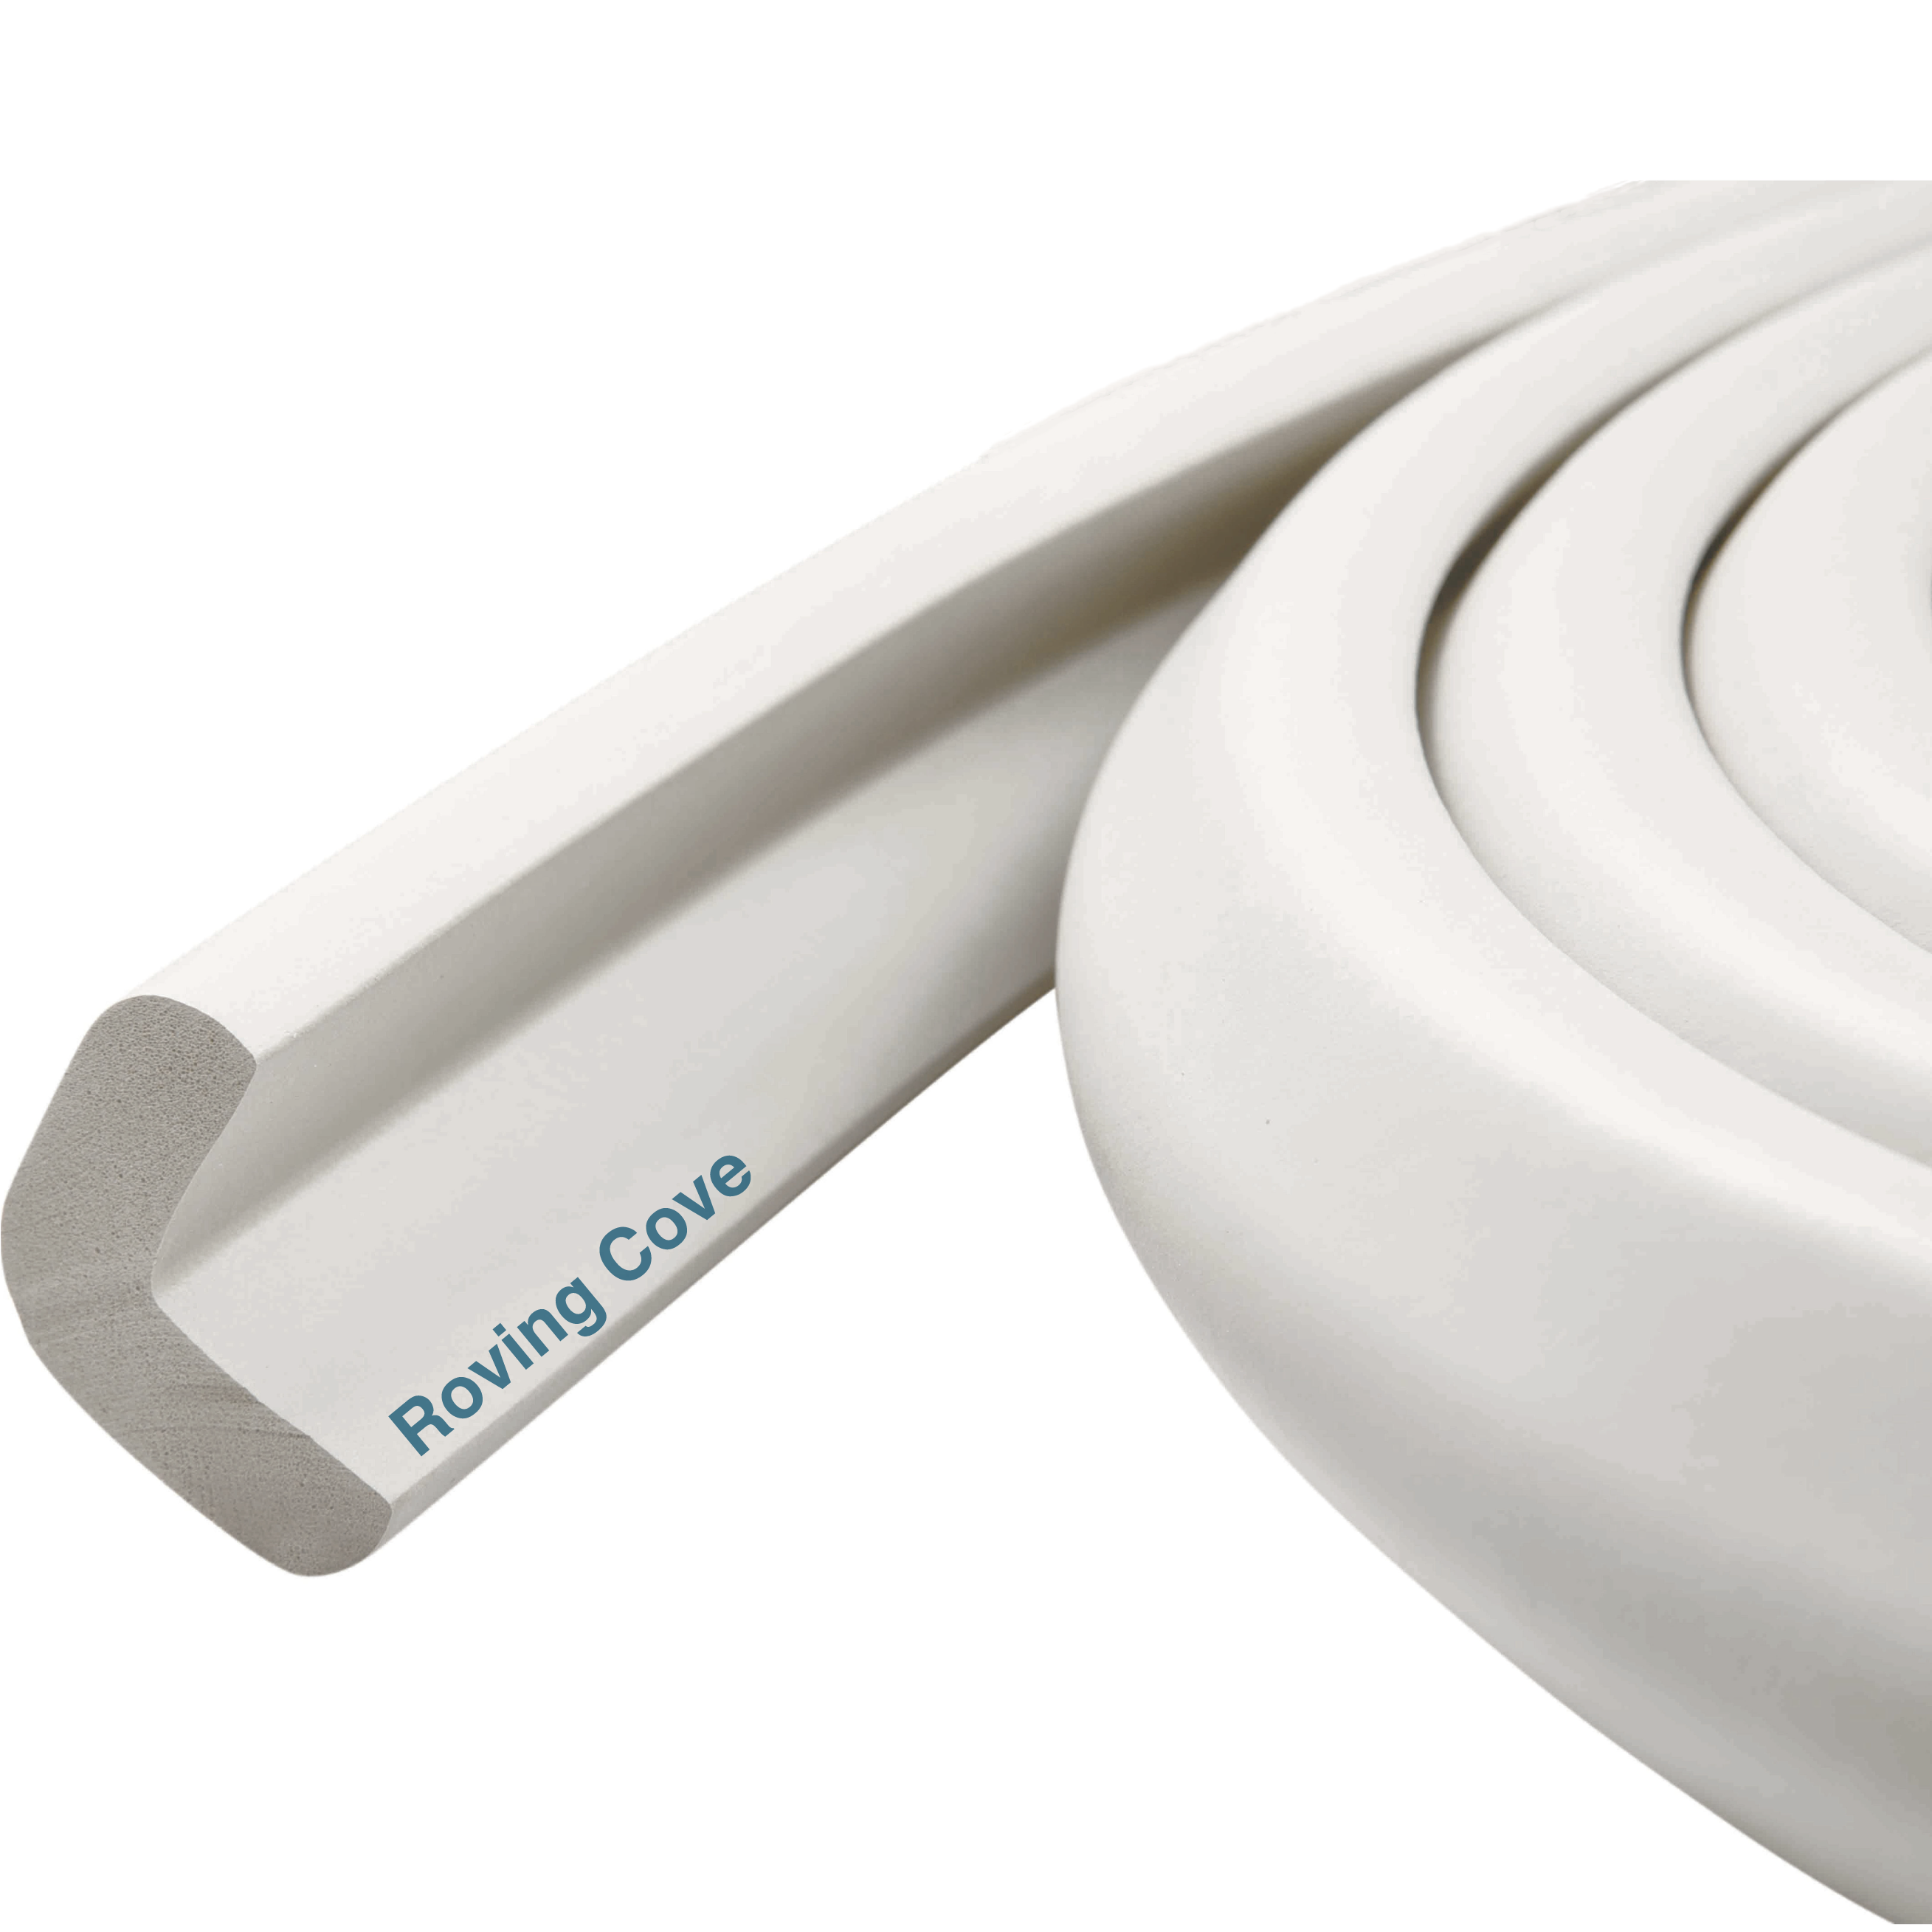 Roving Cove HeftyFit Edge Protector for Baby Proofing, Large 9ft Edge